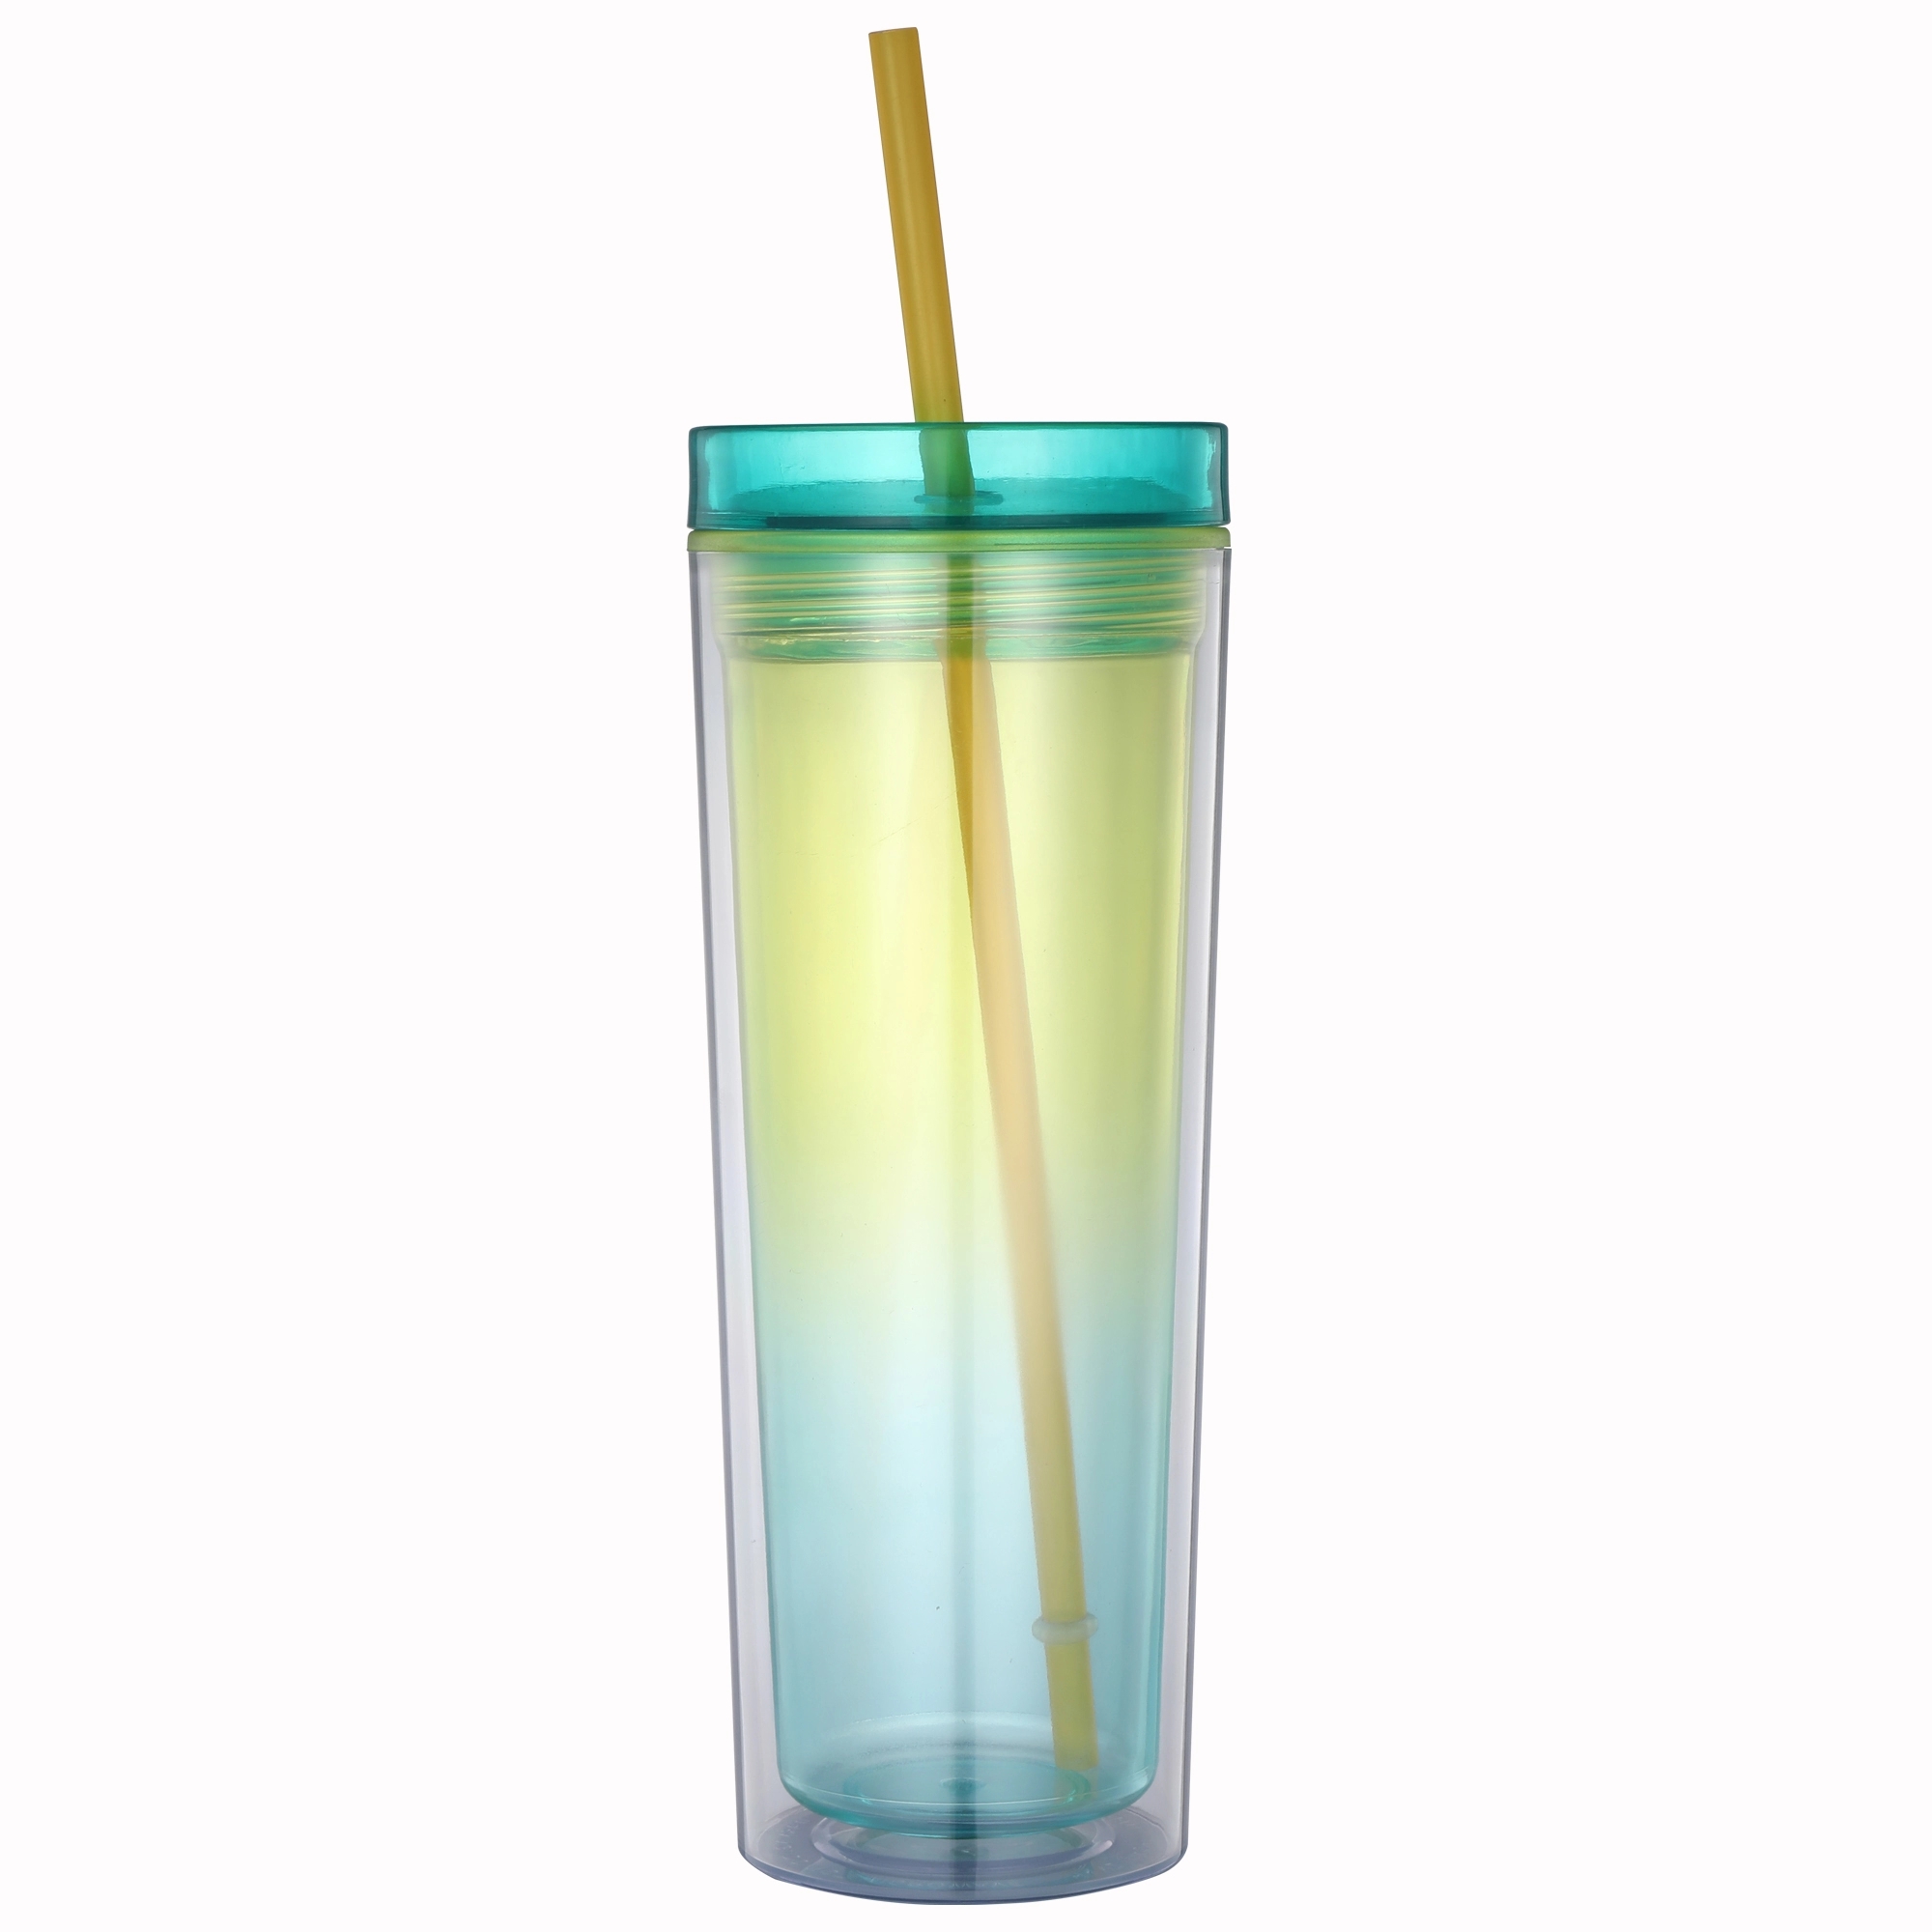 When buying a plastic water cup, is the material more important or the function more important?